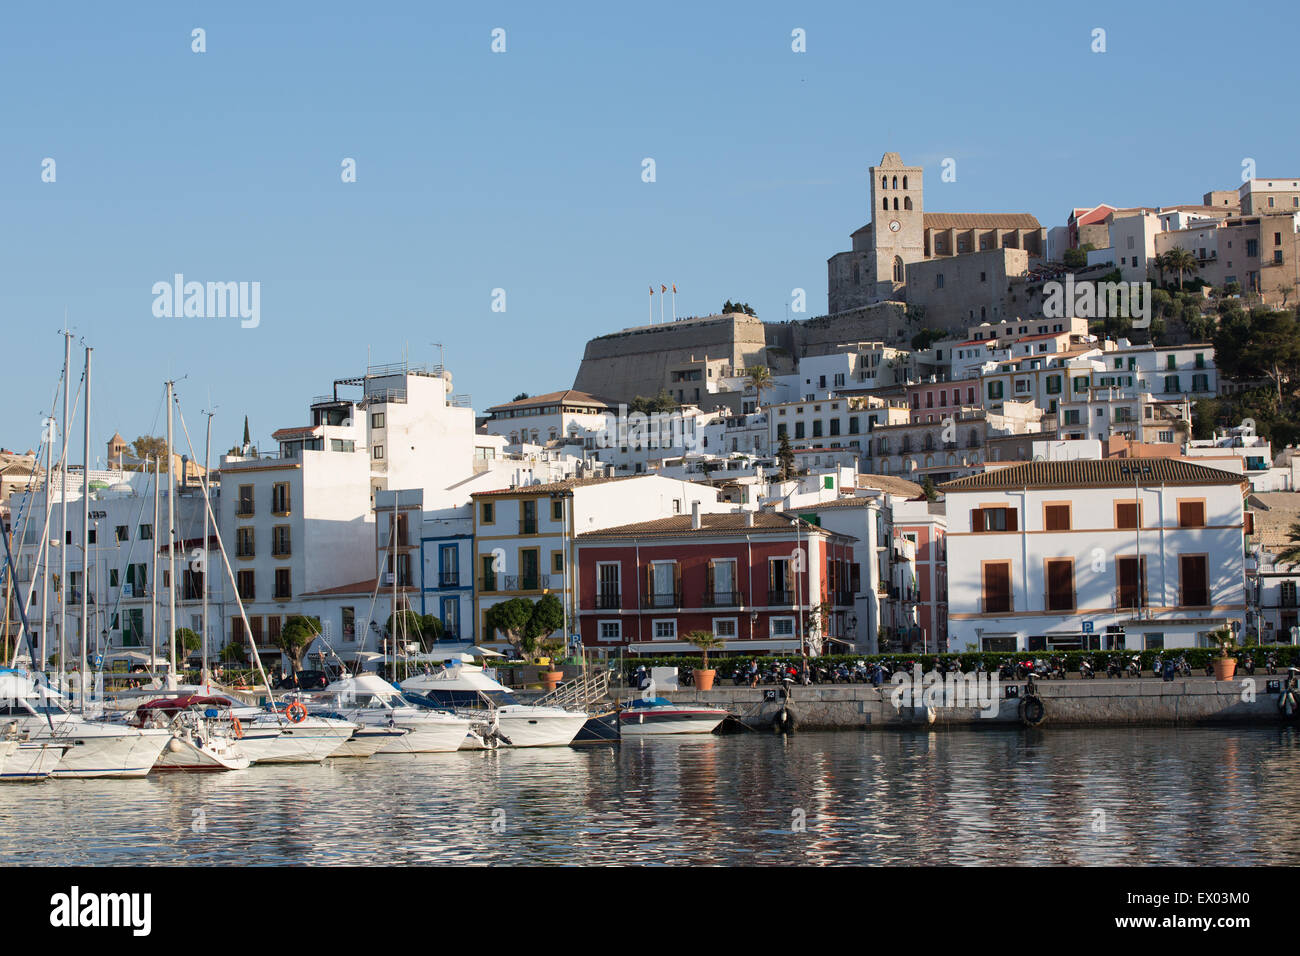 View of old town harbor, Ibiza, Spain Stock Photo